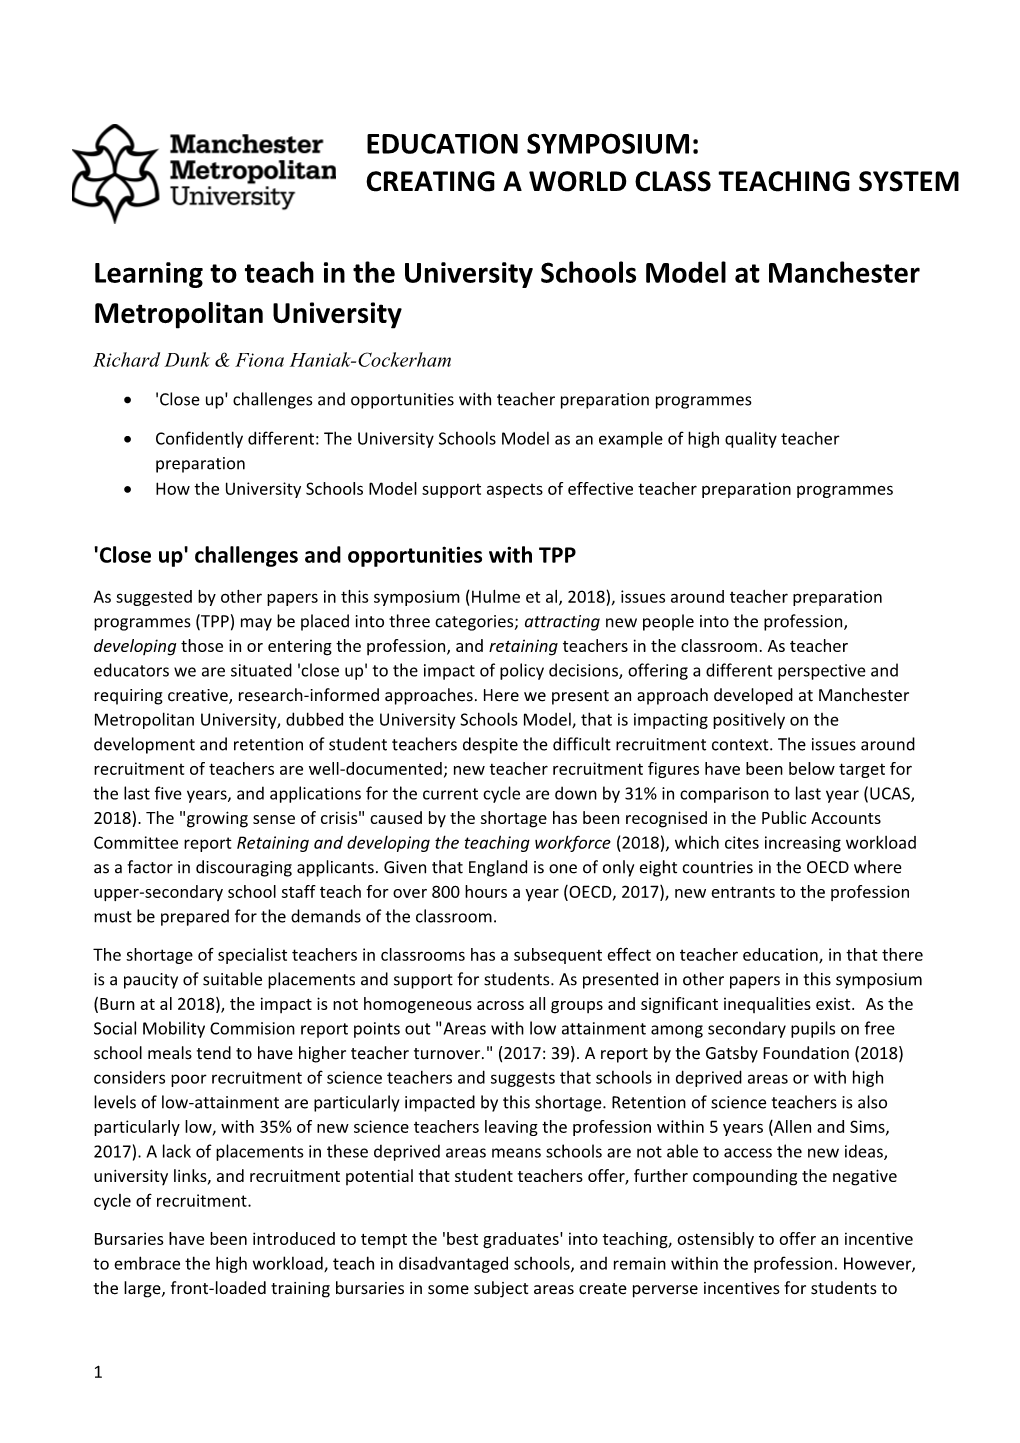 Learning to Teach in the University Schools Model at Manchester Metropolitan University